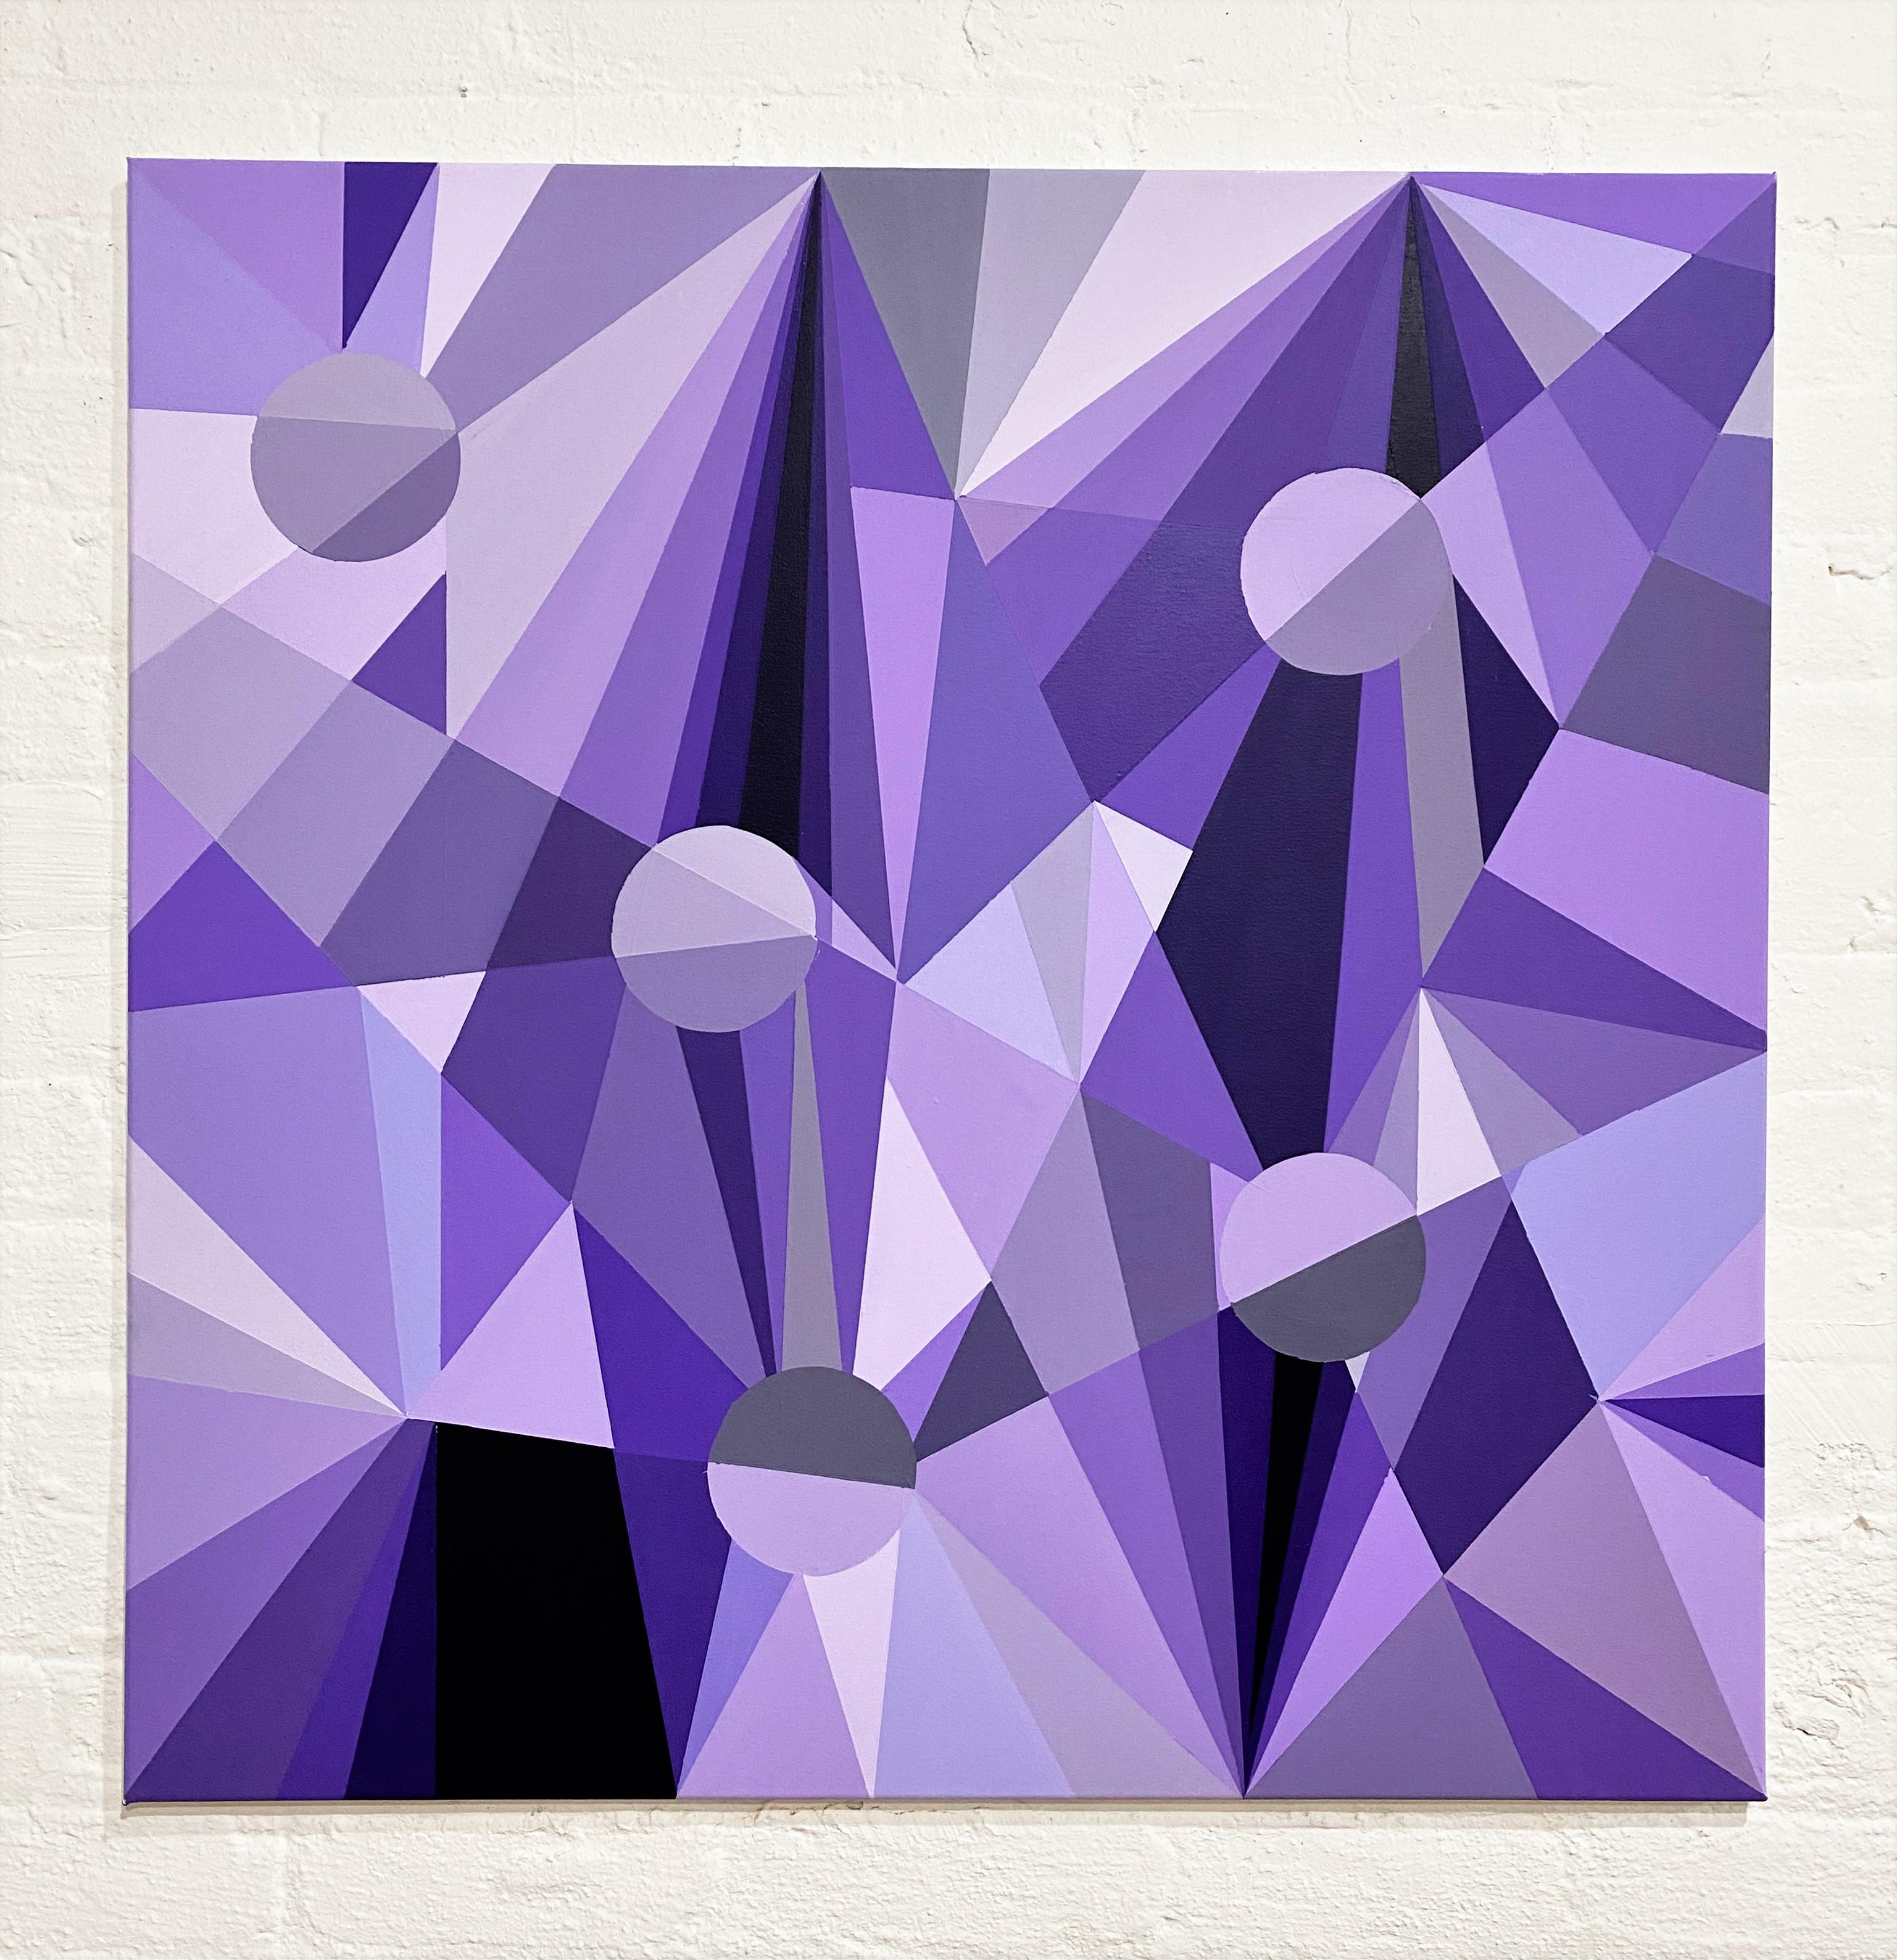 Drops of Amethyst by Edward Granger, Represented by Tuleste Factory 2